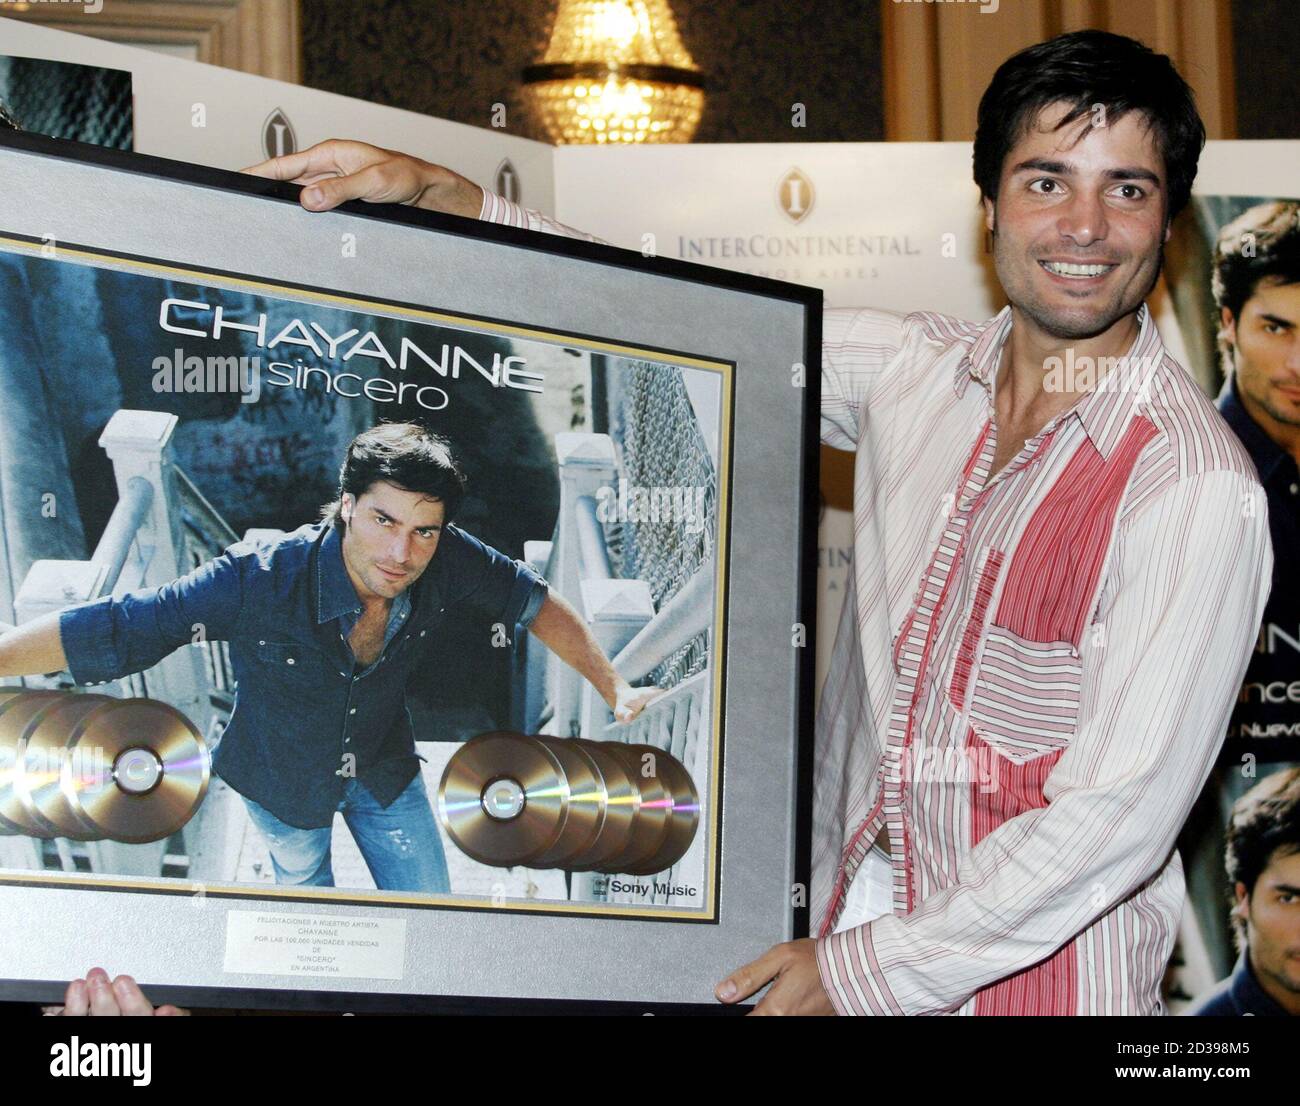 Puerto Rican singer and actor Chayanne, born Elmer Figueroa Arce, shows the cover of his latest album "Sincero" during a press conference in Buenos Aires, Argentina, March 8, 2004. Chayanne announced a North American tour that will take him across the United States through April, 2004. REUTERS/Enrique Marcarian  EM Foto Stock